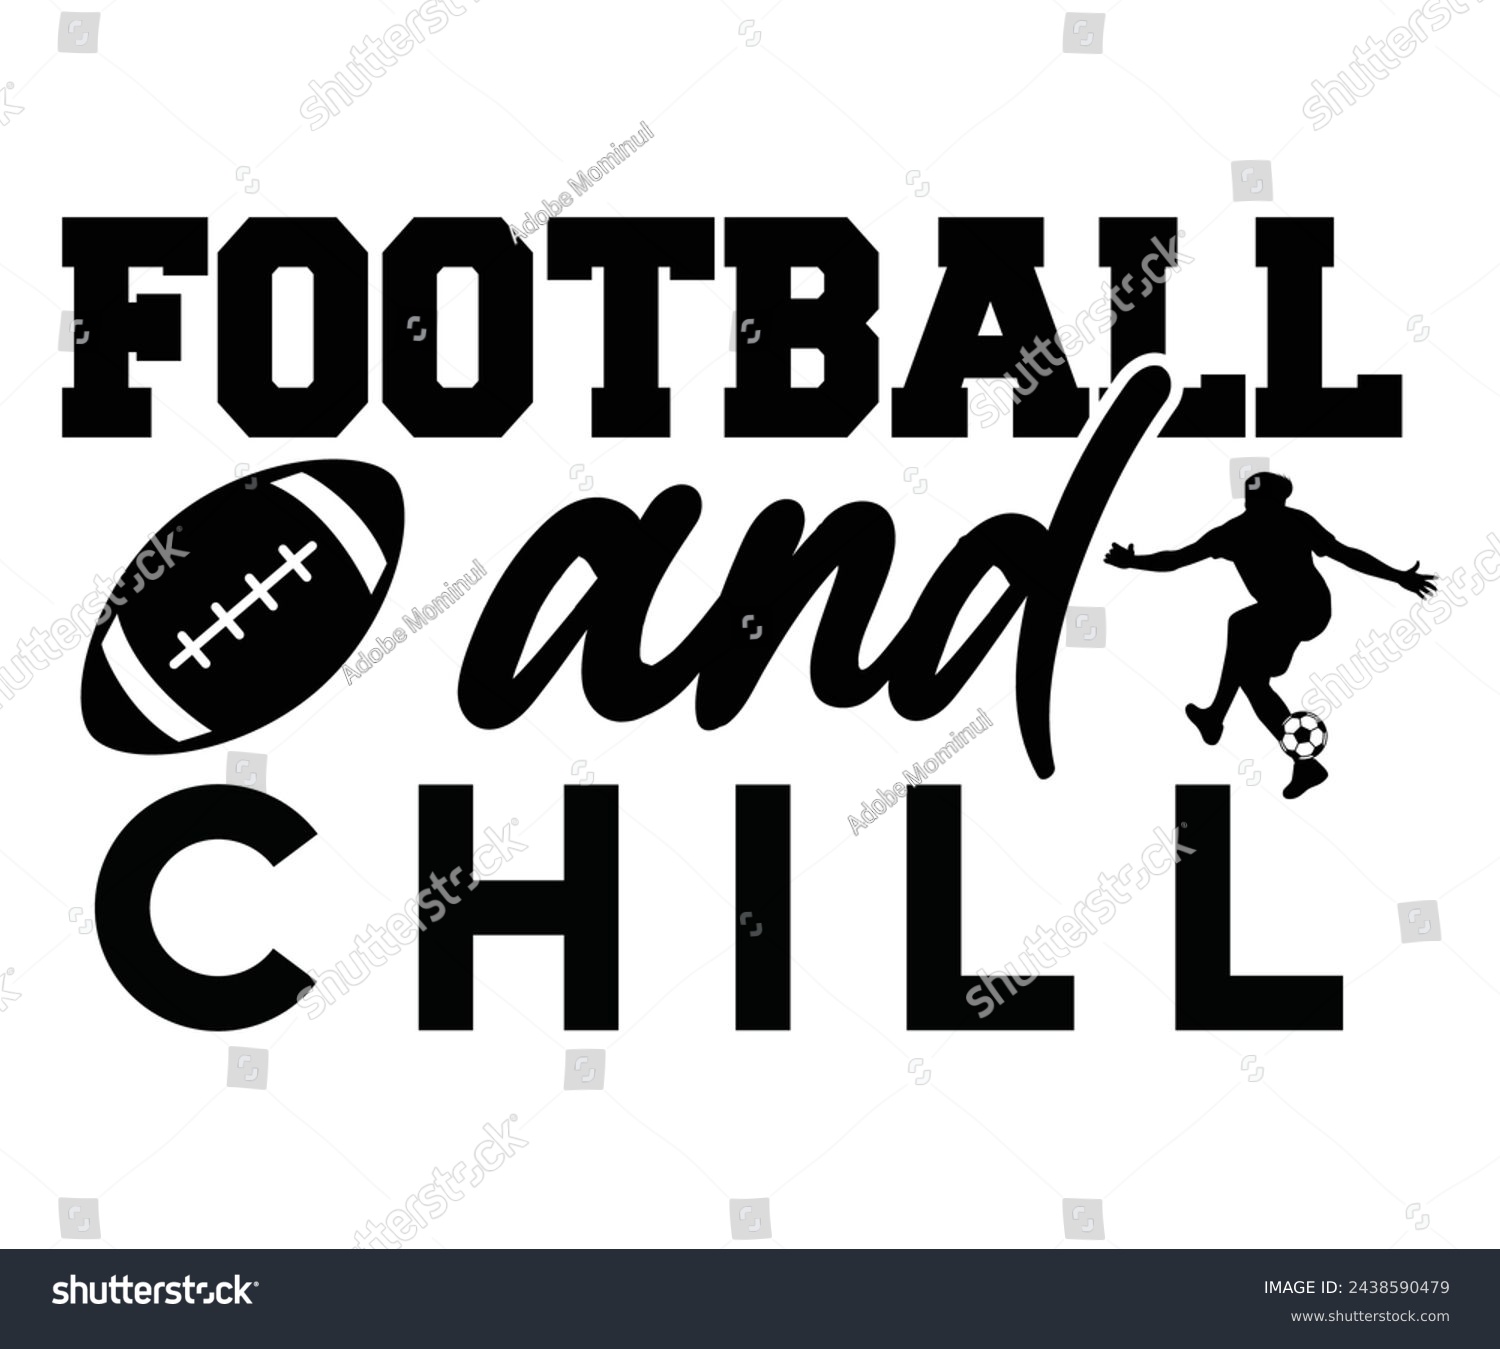 SVG of Football And chill,Football Svg,Football Player Svg,Game Day Shirt,Football Quotes Svg,American Football Svg,Soccer Svg,Cut File,Commercial use svg